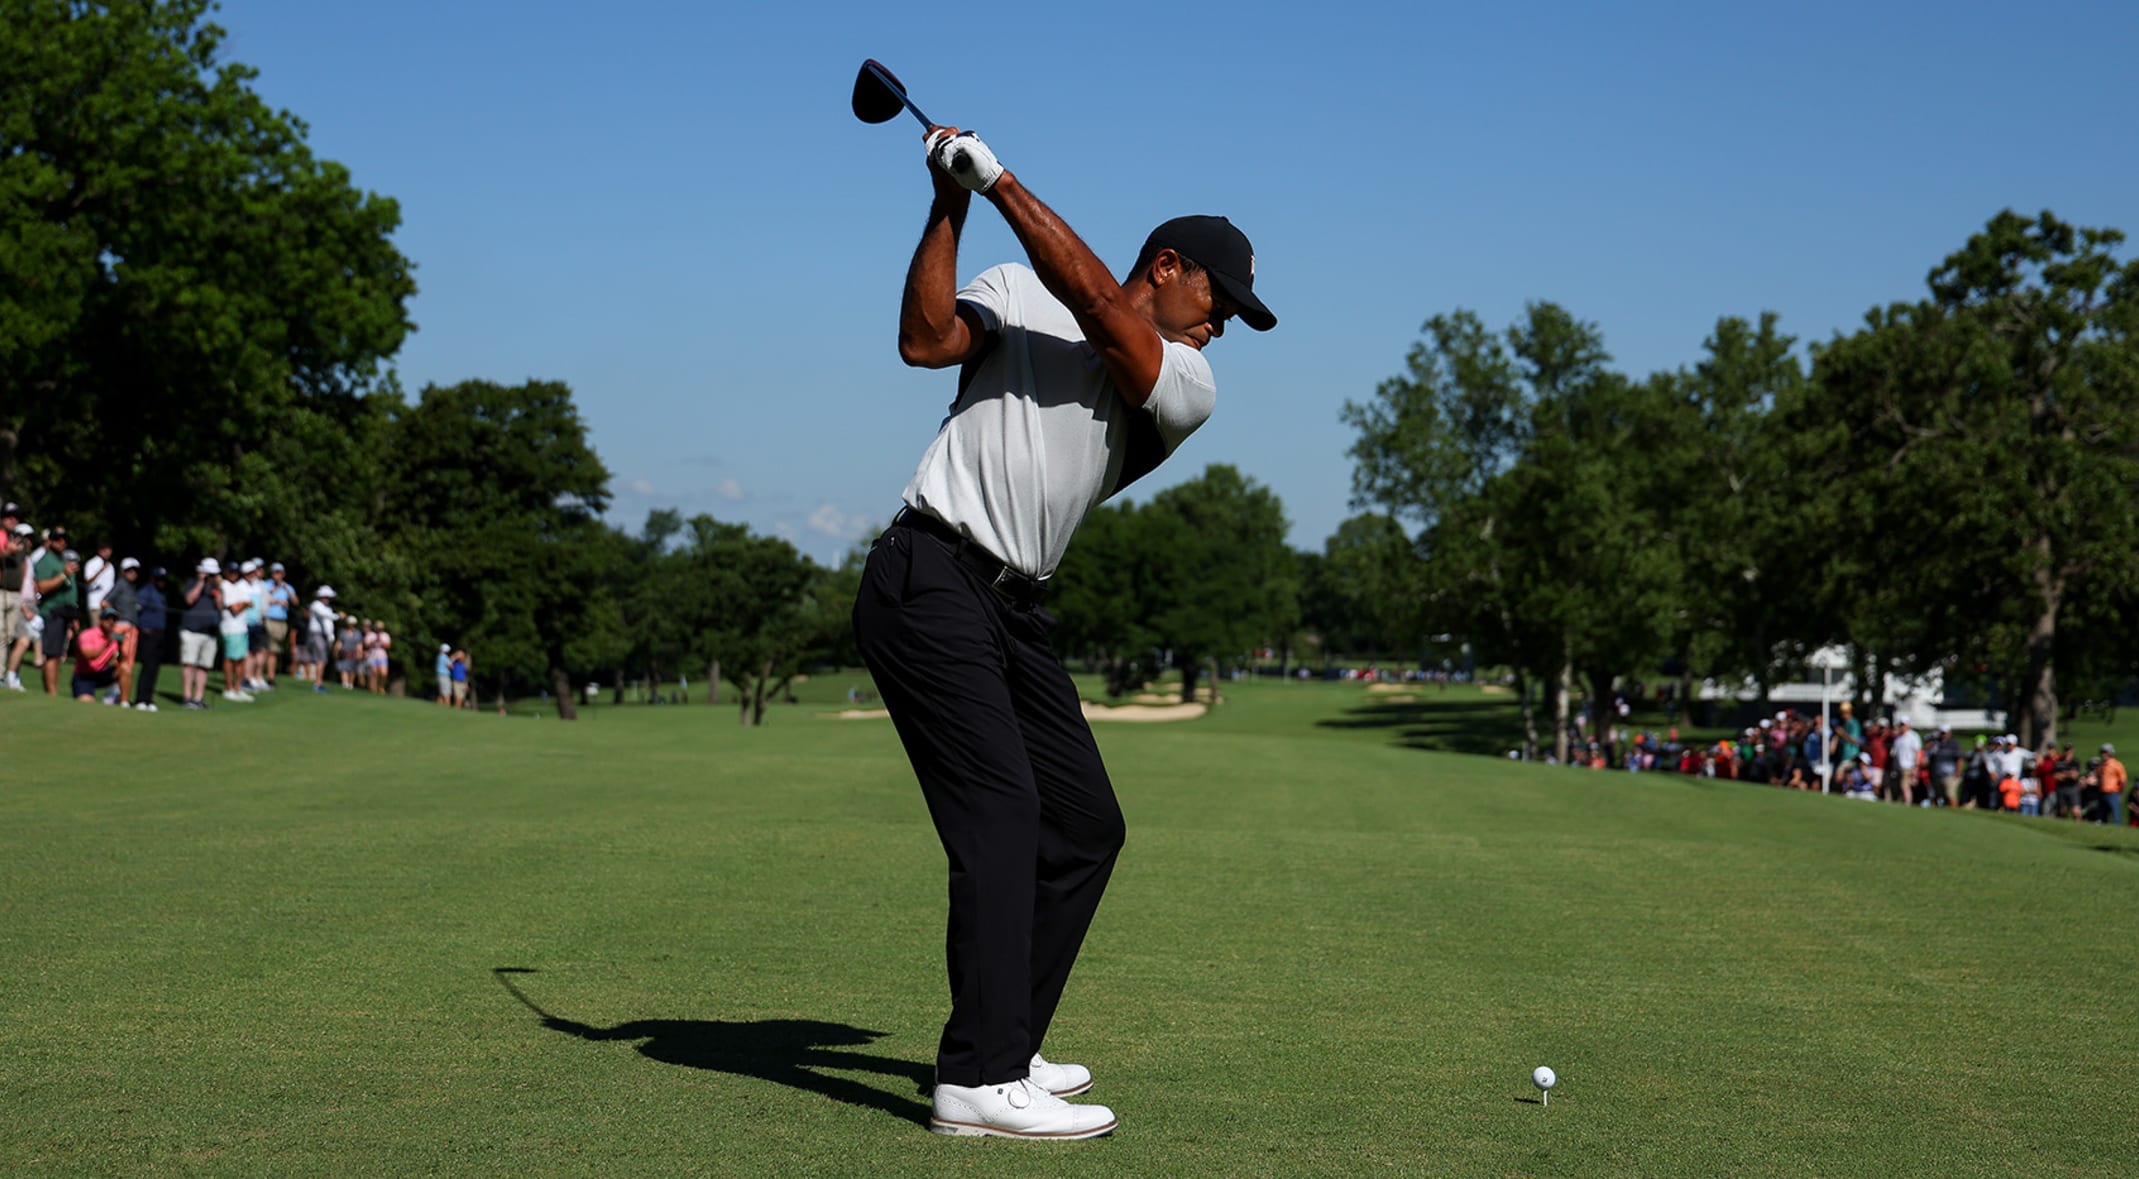 The Principles of the Pro Golf Swing